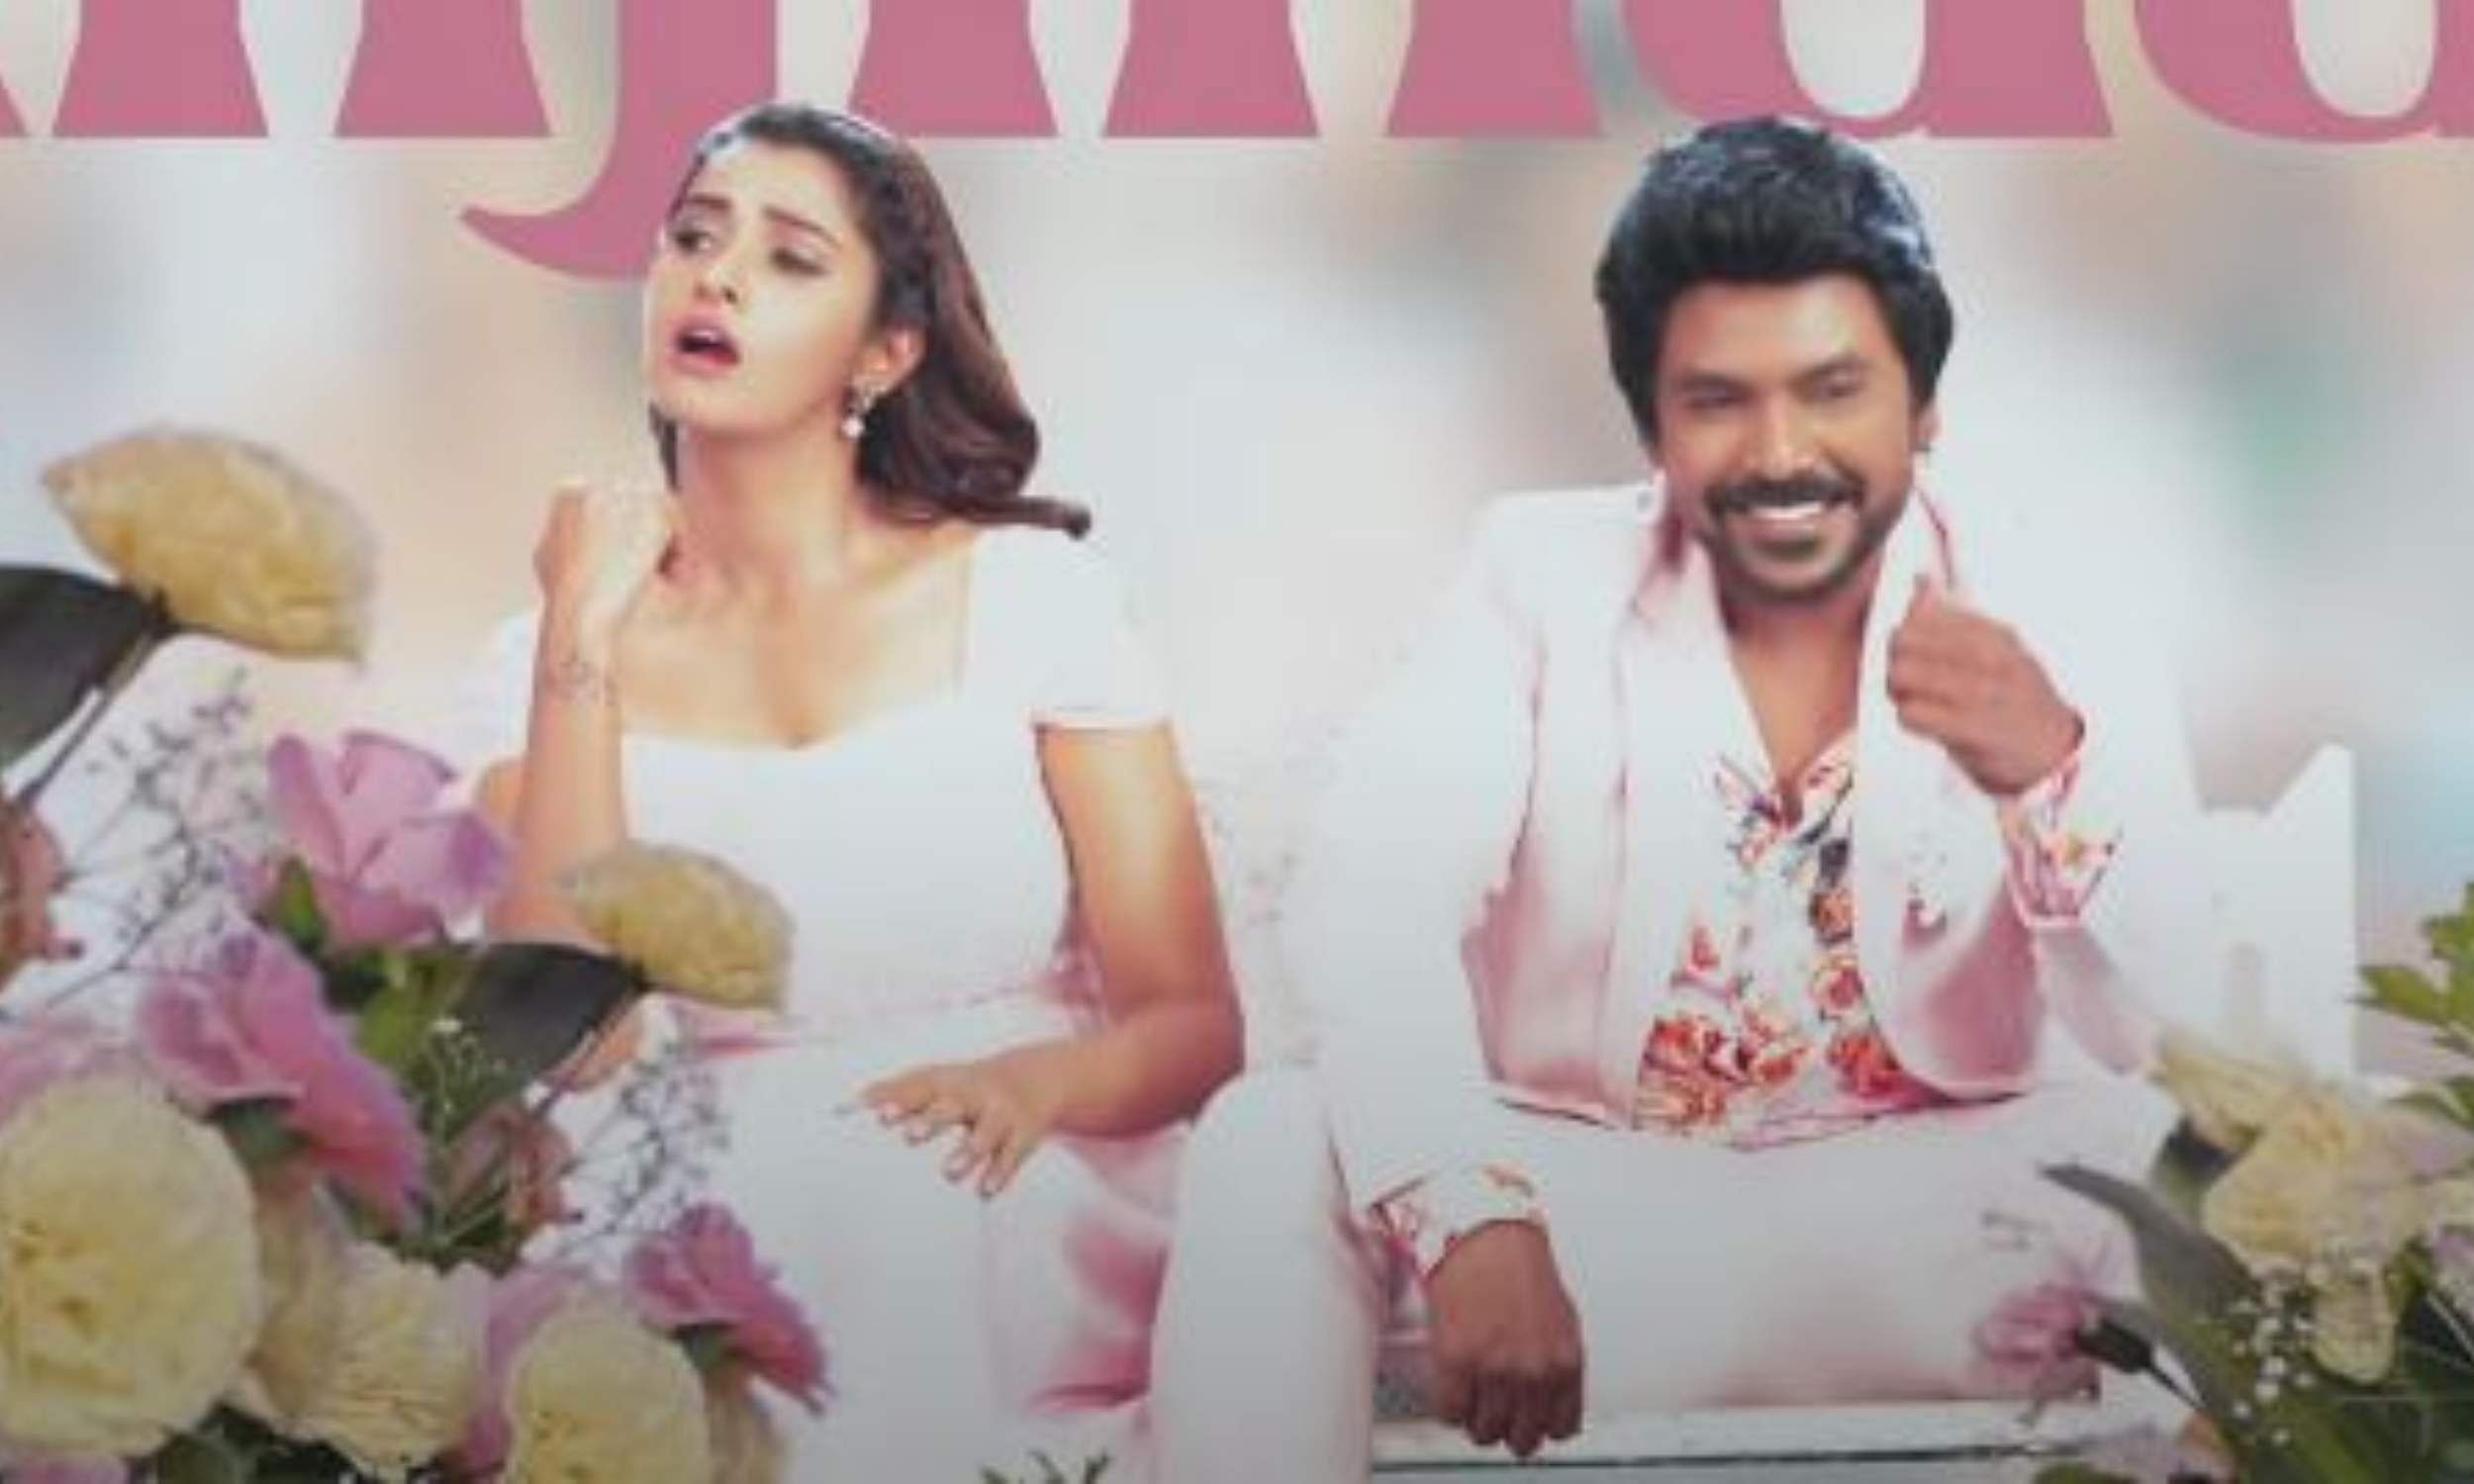 Paadatha Pattellam song from Raghava Lawrence's Rudhran is out